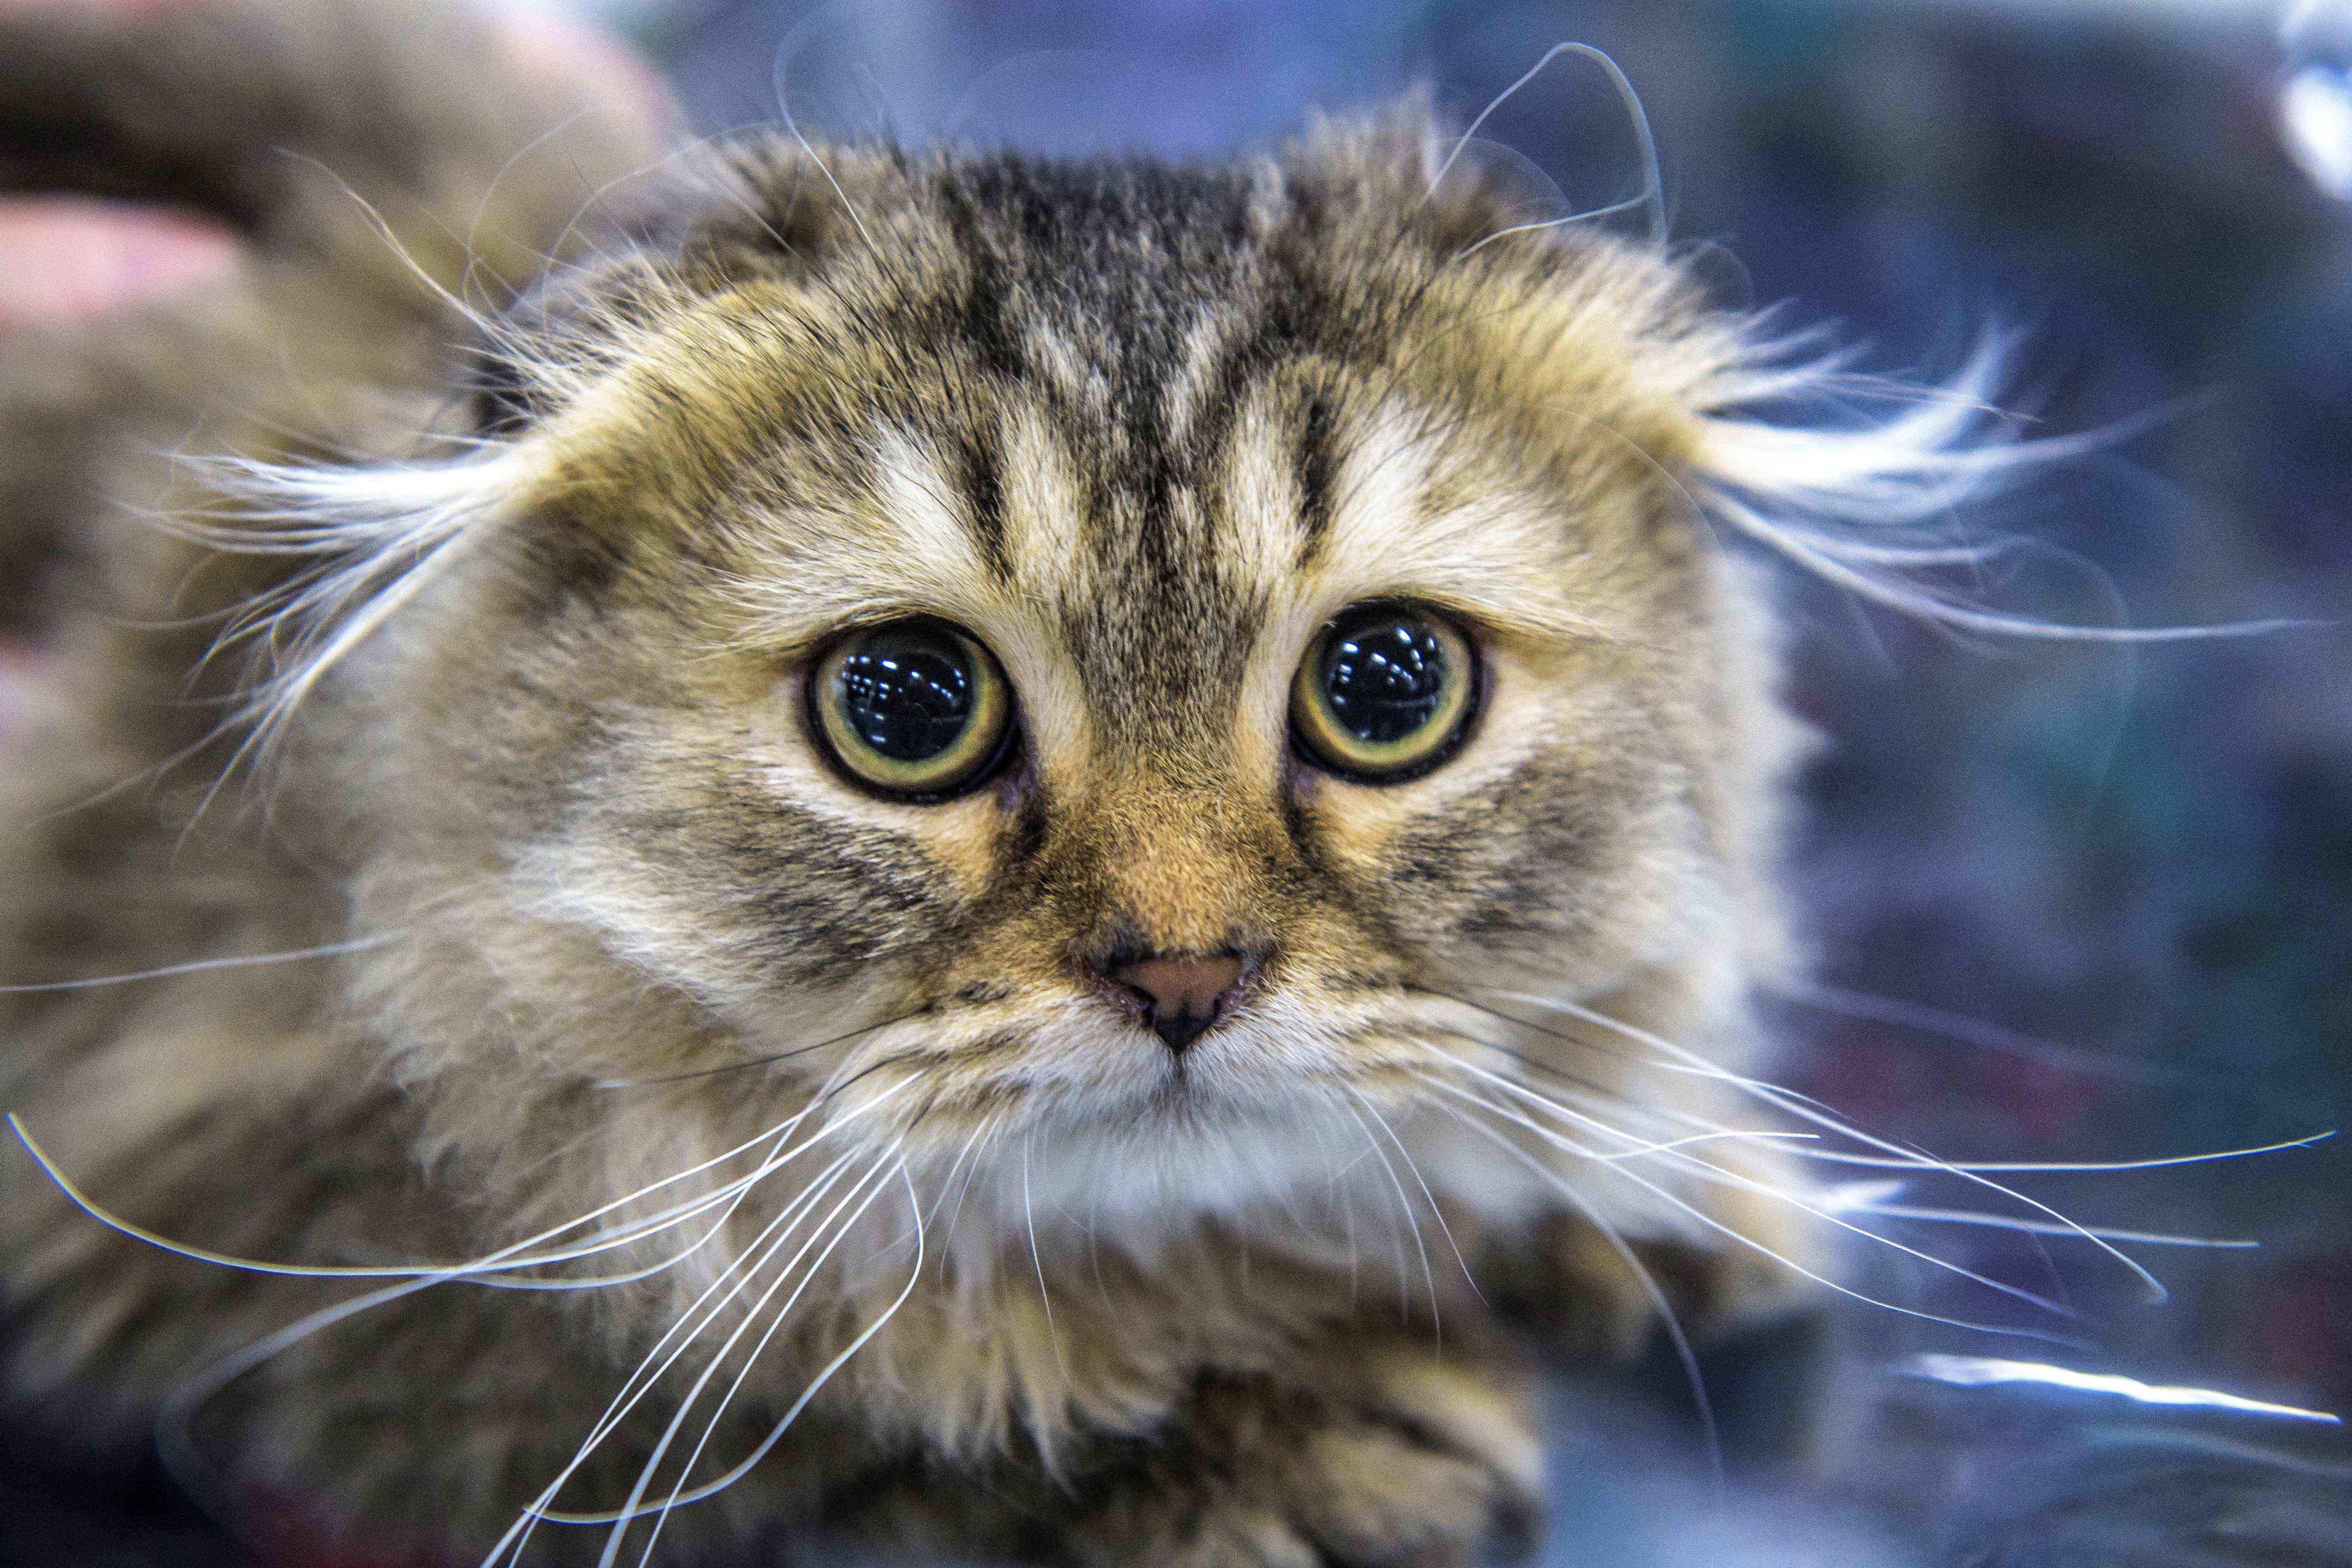 The six-week-old female Scottish Fold cat was pictured wrapped in cling film